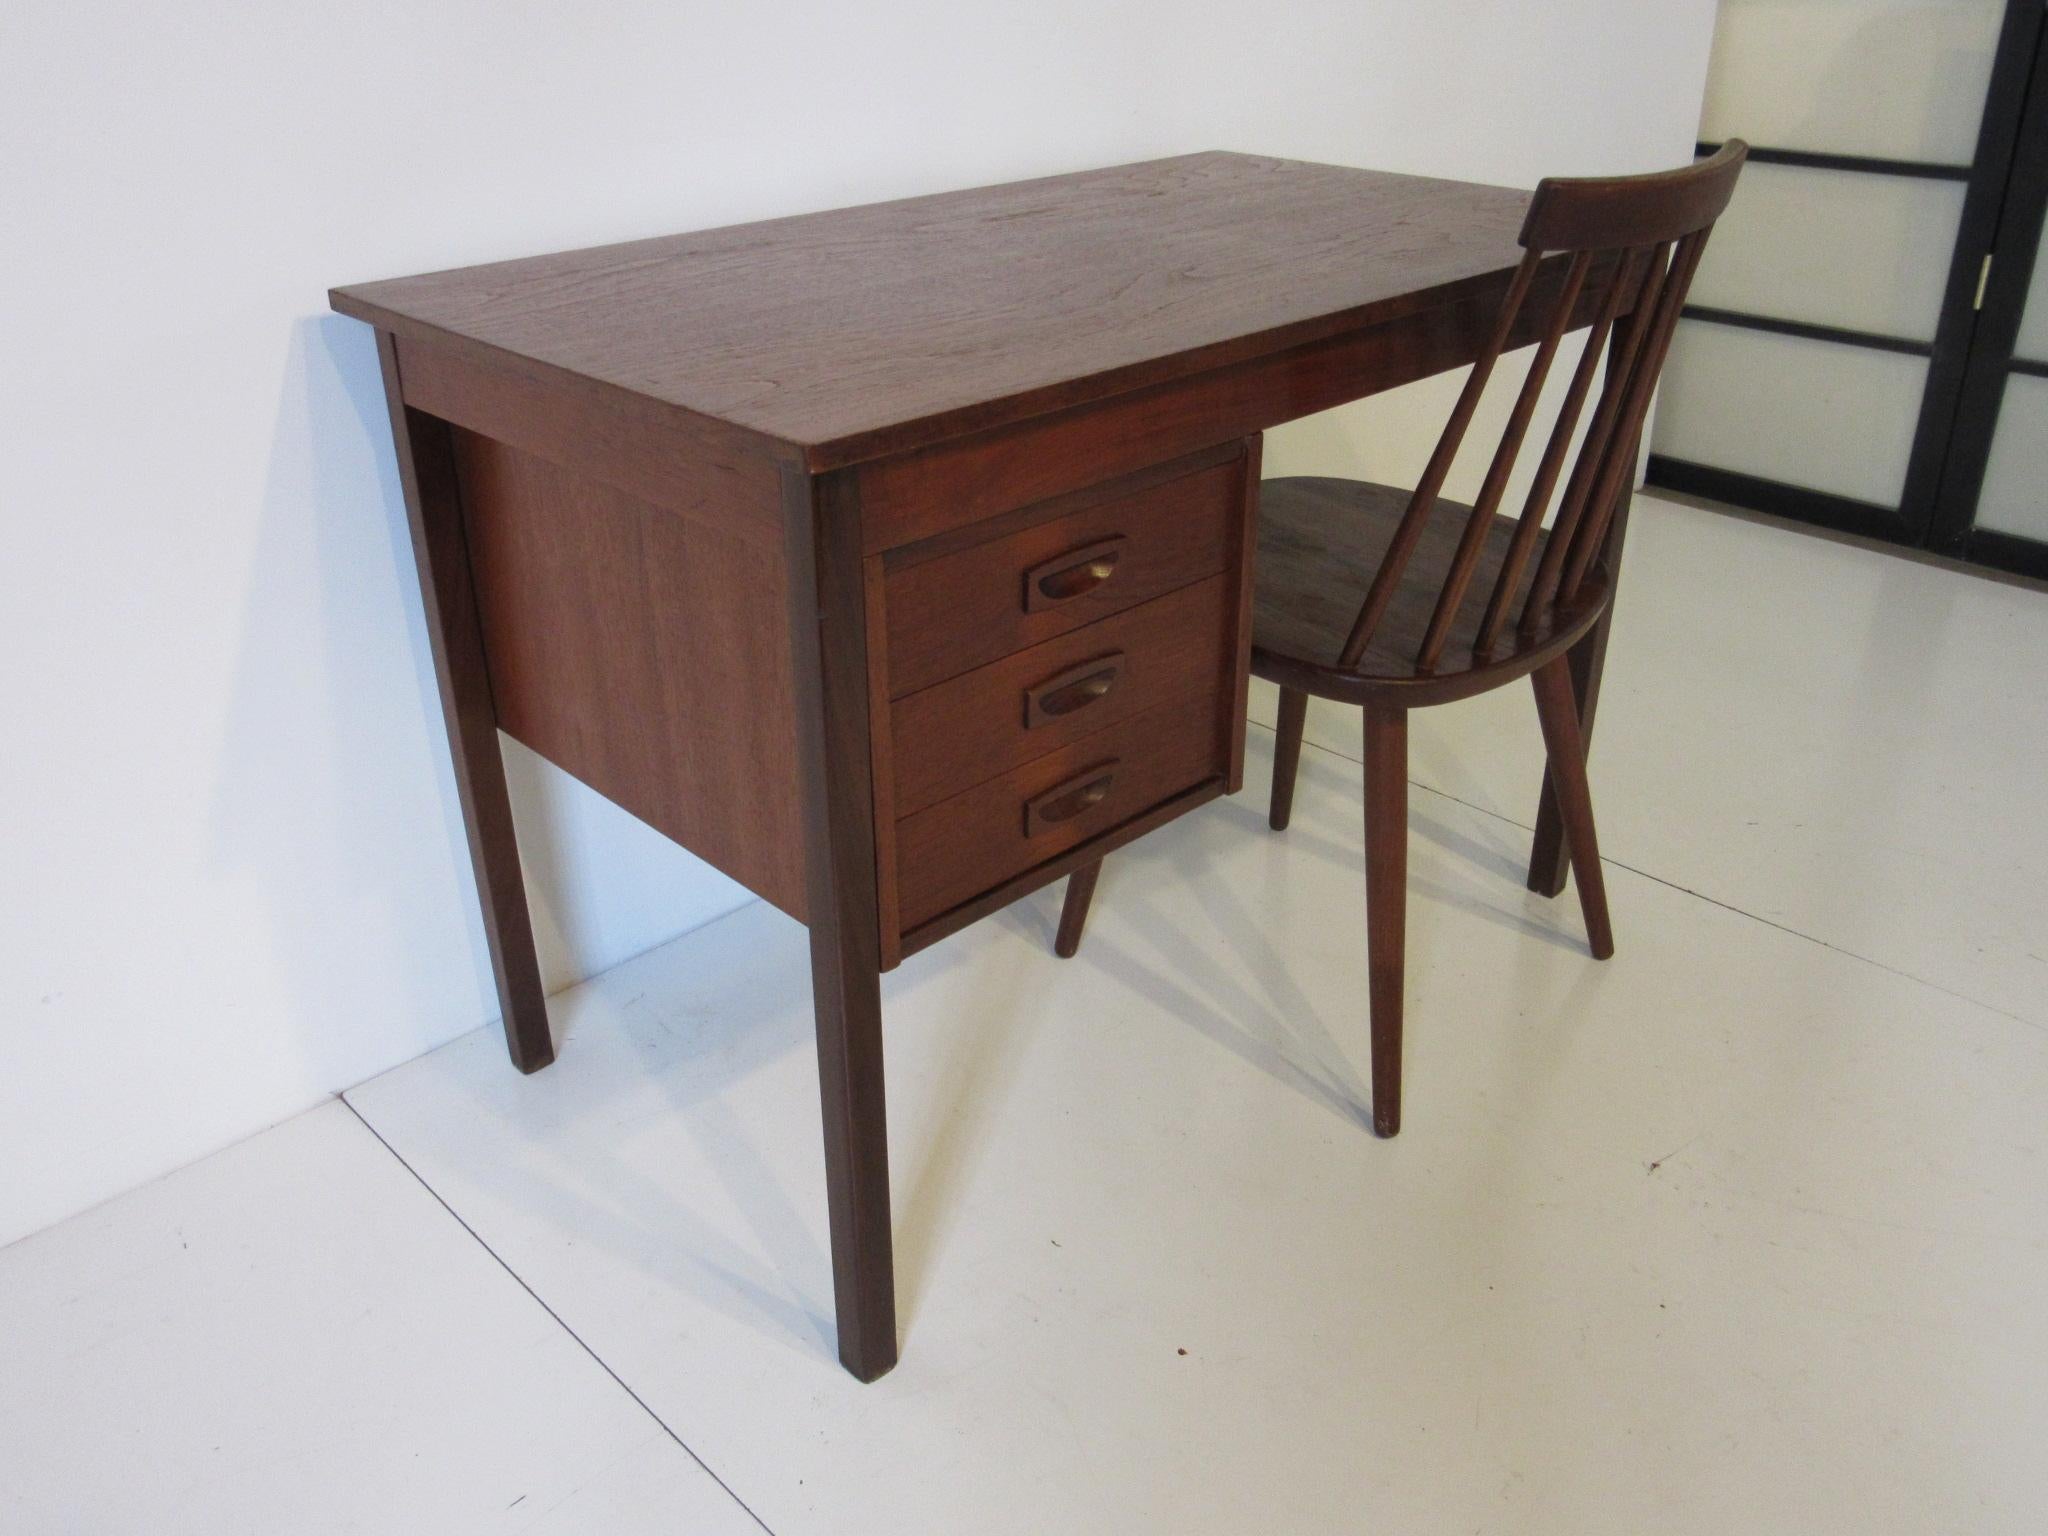 A smaller scale Kids teak wood desk with three drawers and a matching chair in the manner of Karl-Erik Ekselius, manufactured in Denmark. The chair measurement is 31.5